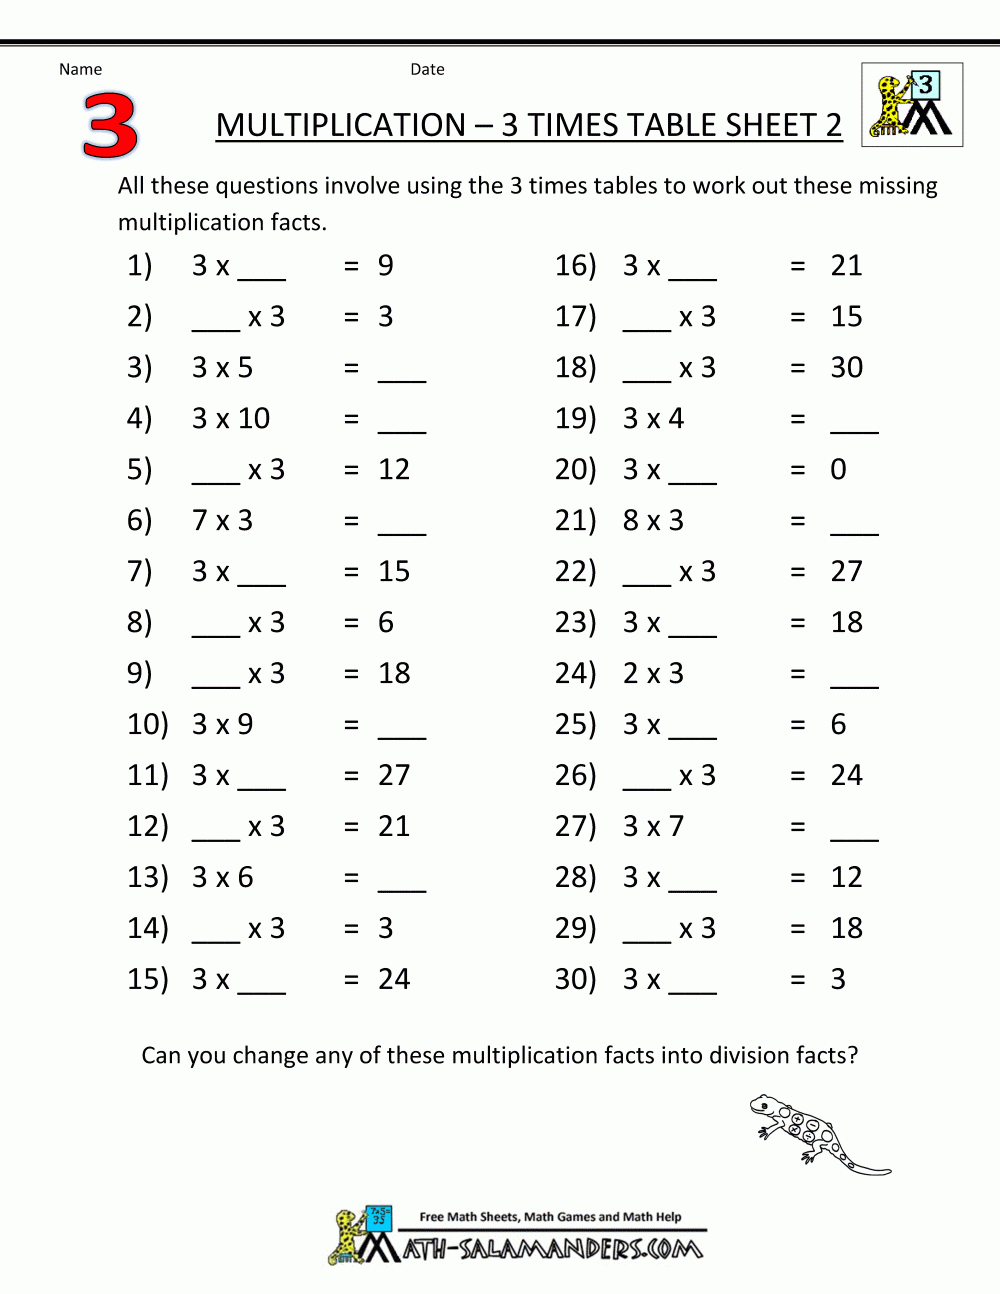 Multiplication Fact Sheets 3 Times Table 2 | Printable Math intended for Multiplication Worksheets 3 Times Tables